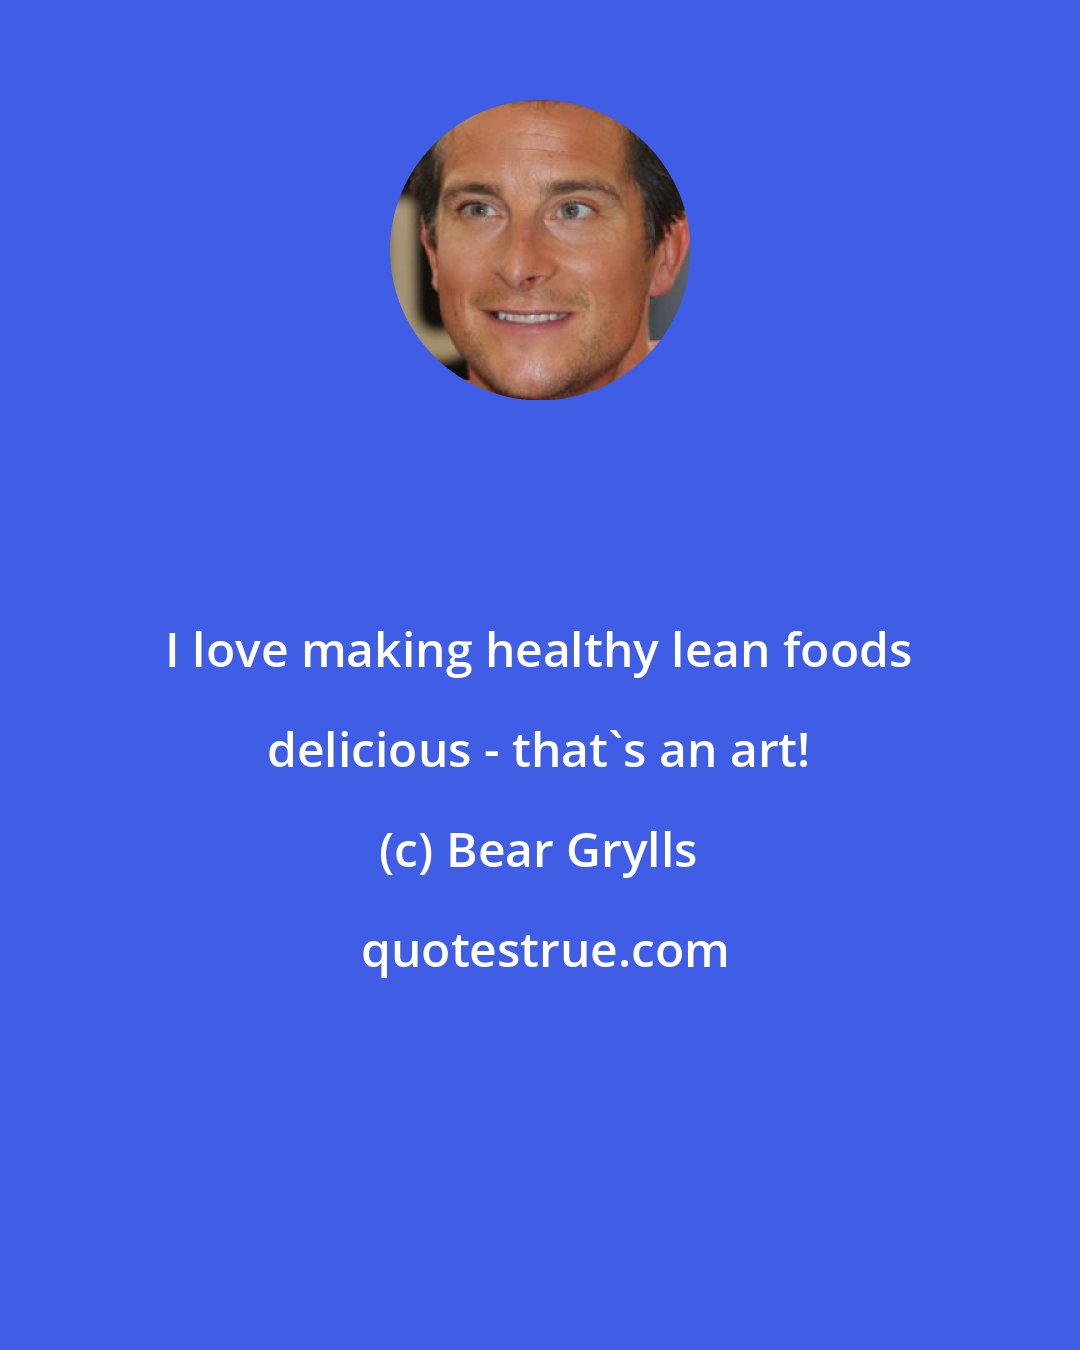 Bear Grylls: I love making healthy lean foods delicious - that's an art!